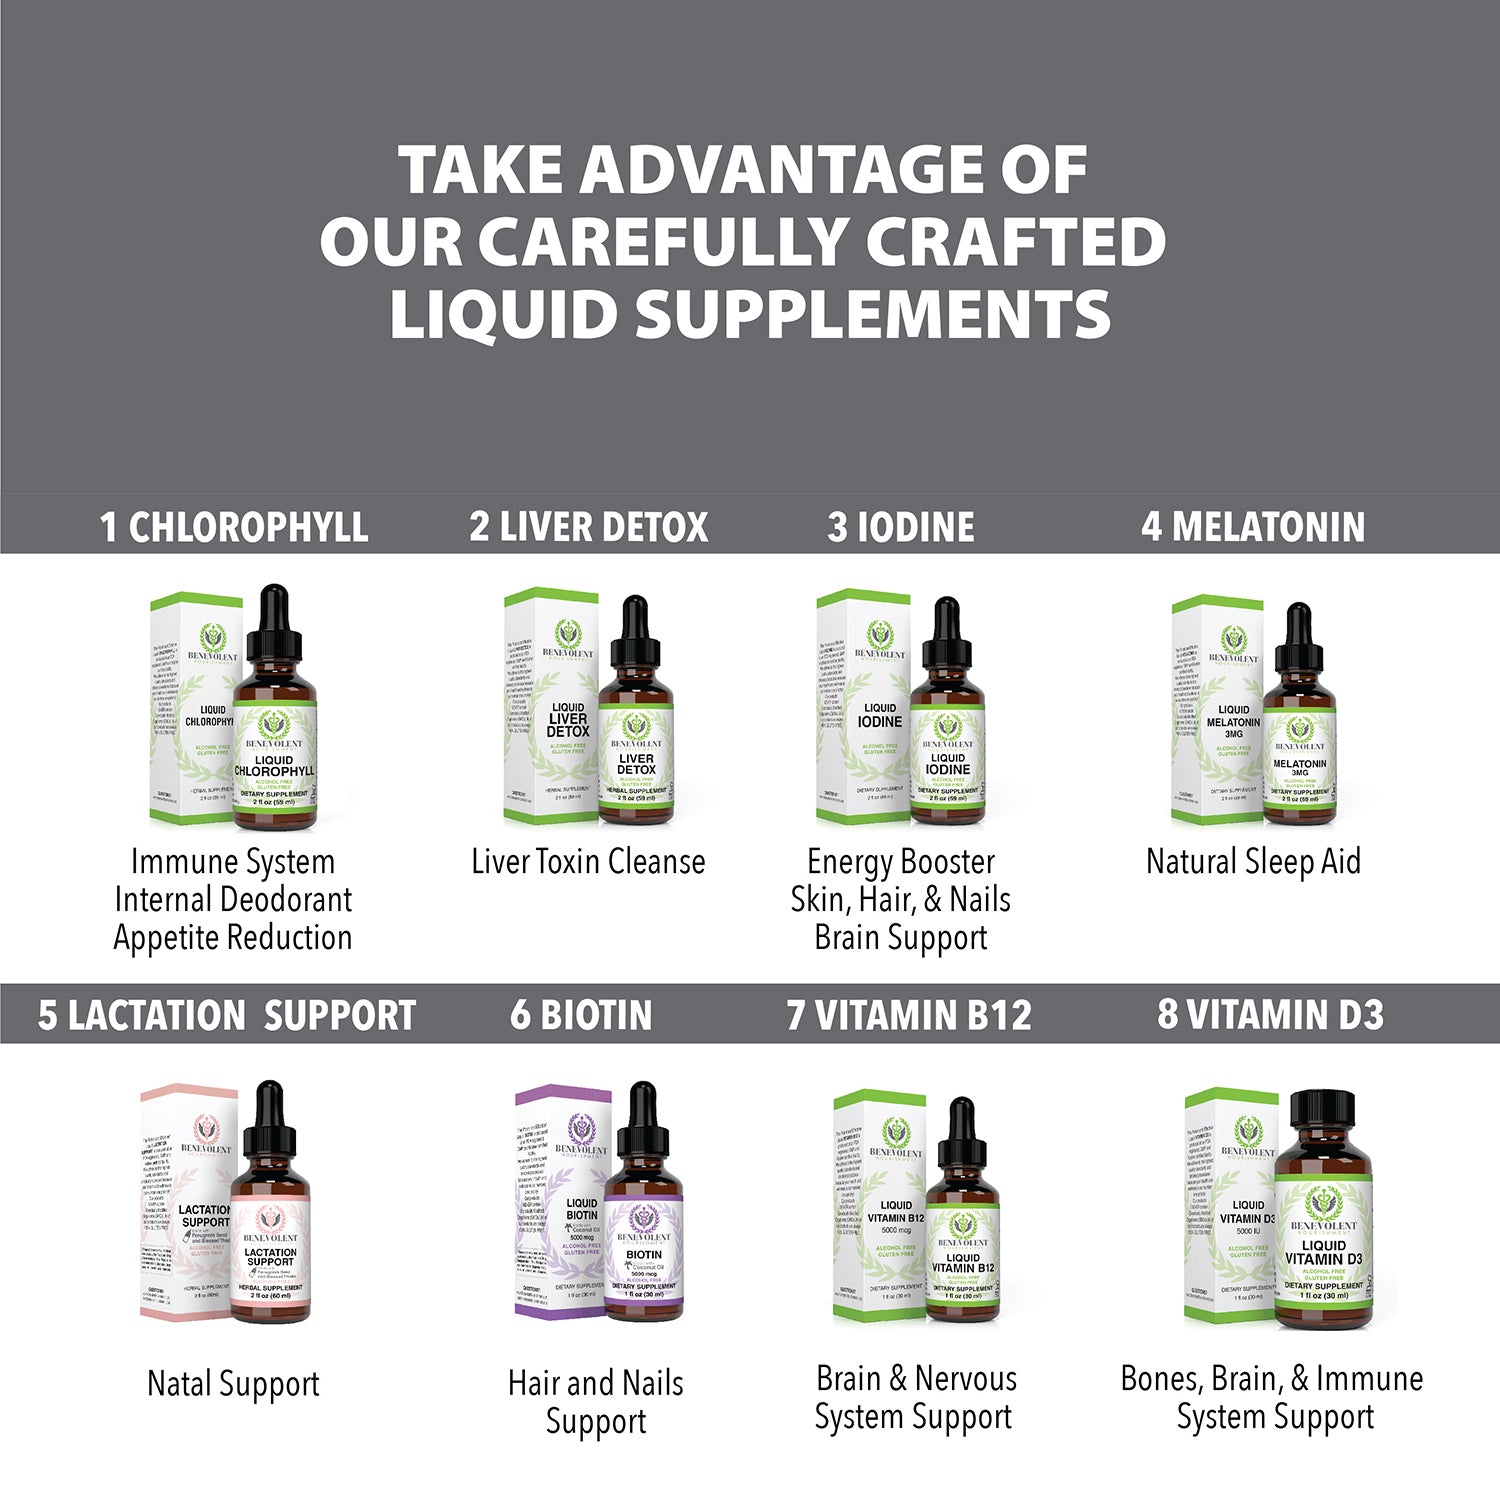 Our Liquid supplements including Lactation Support